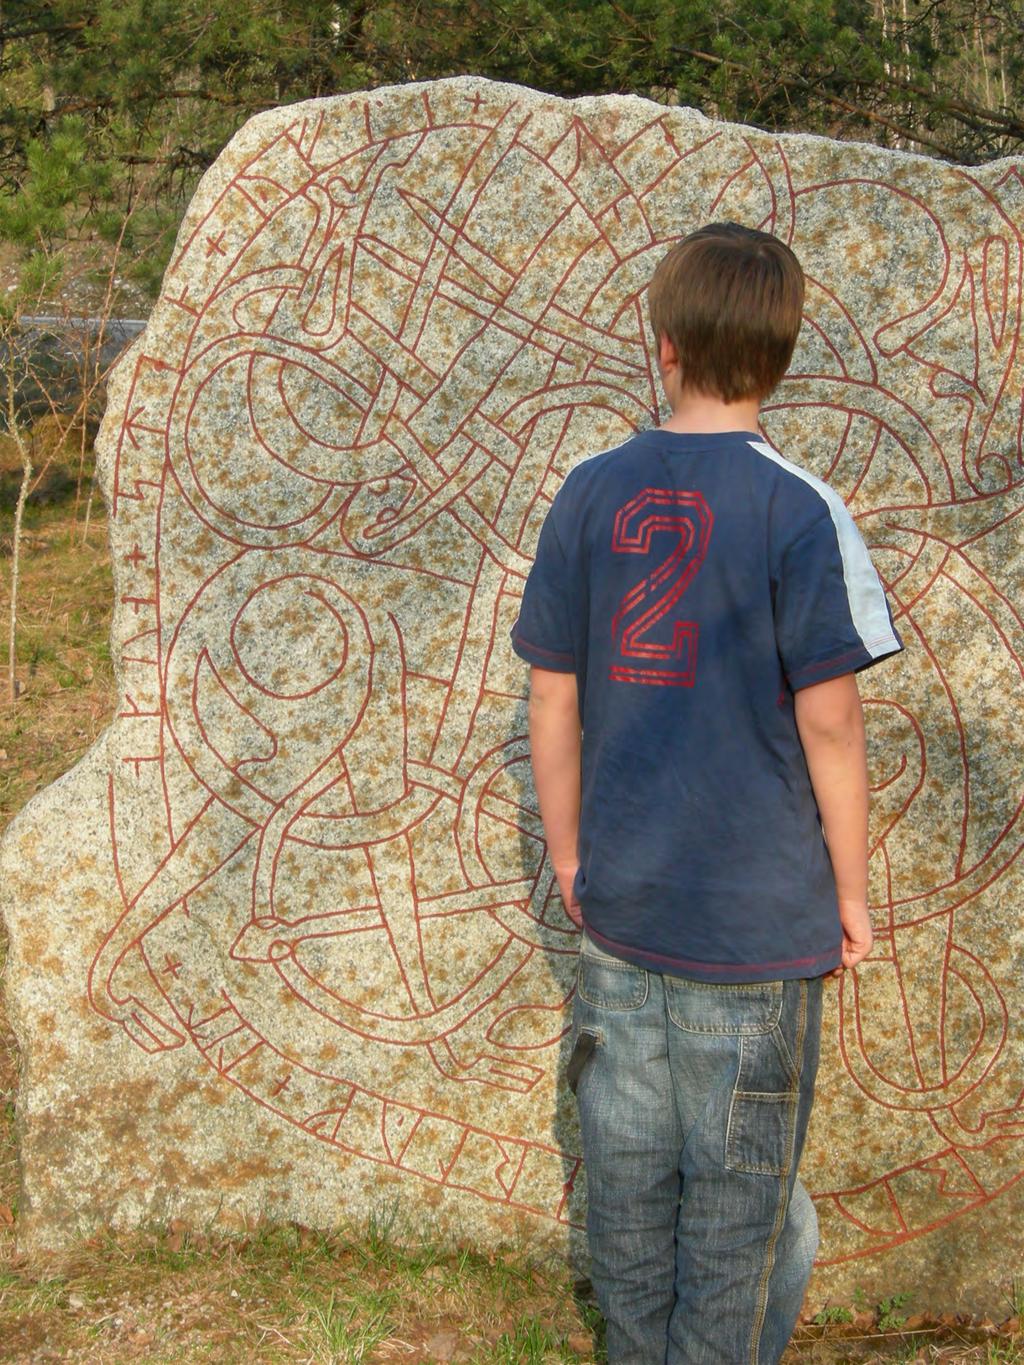 As I stared at the runestone, a secret message